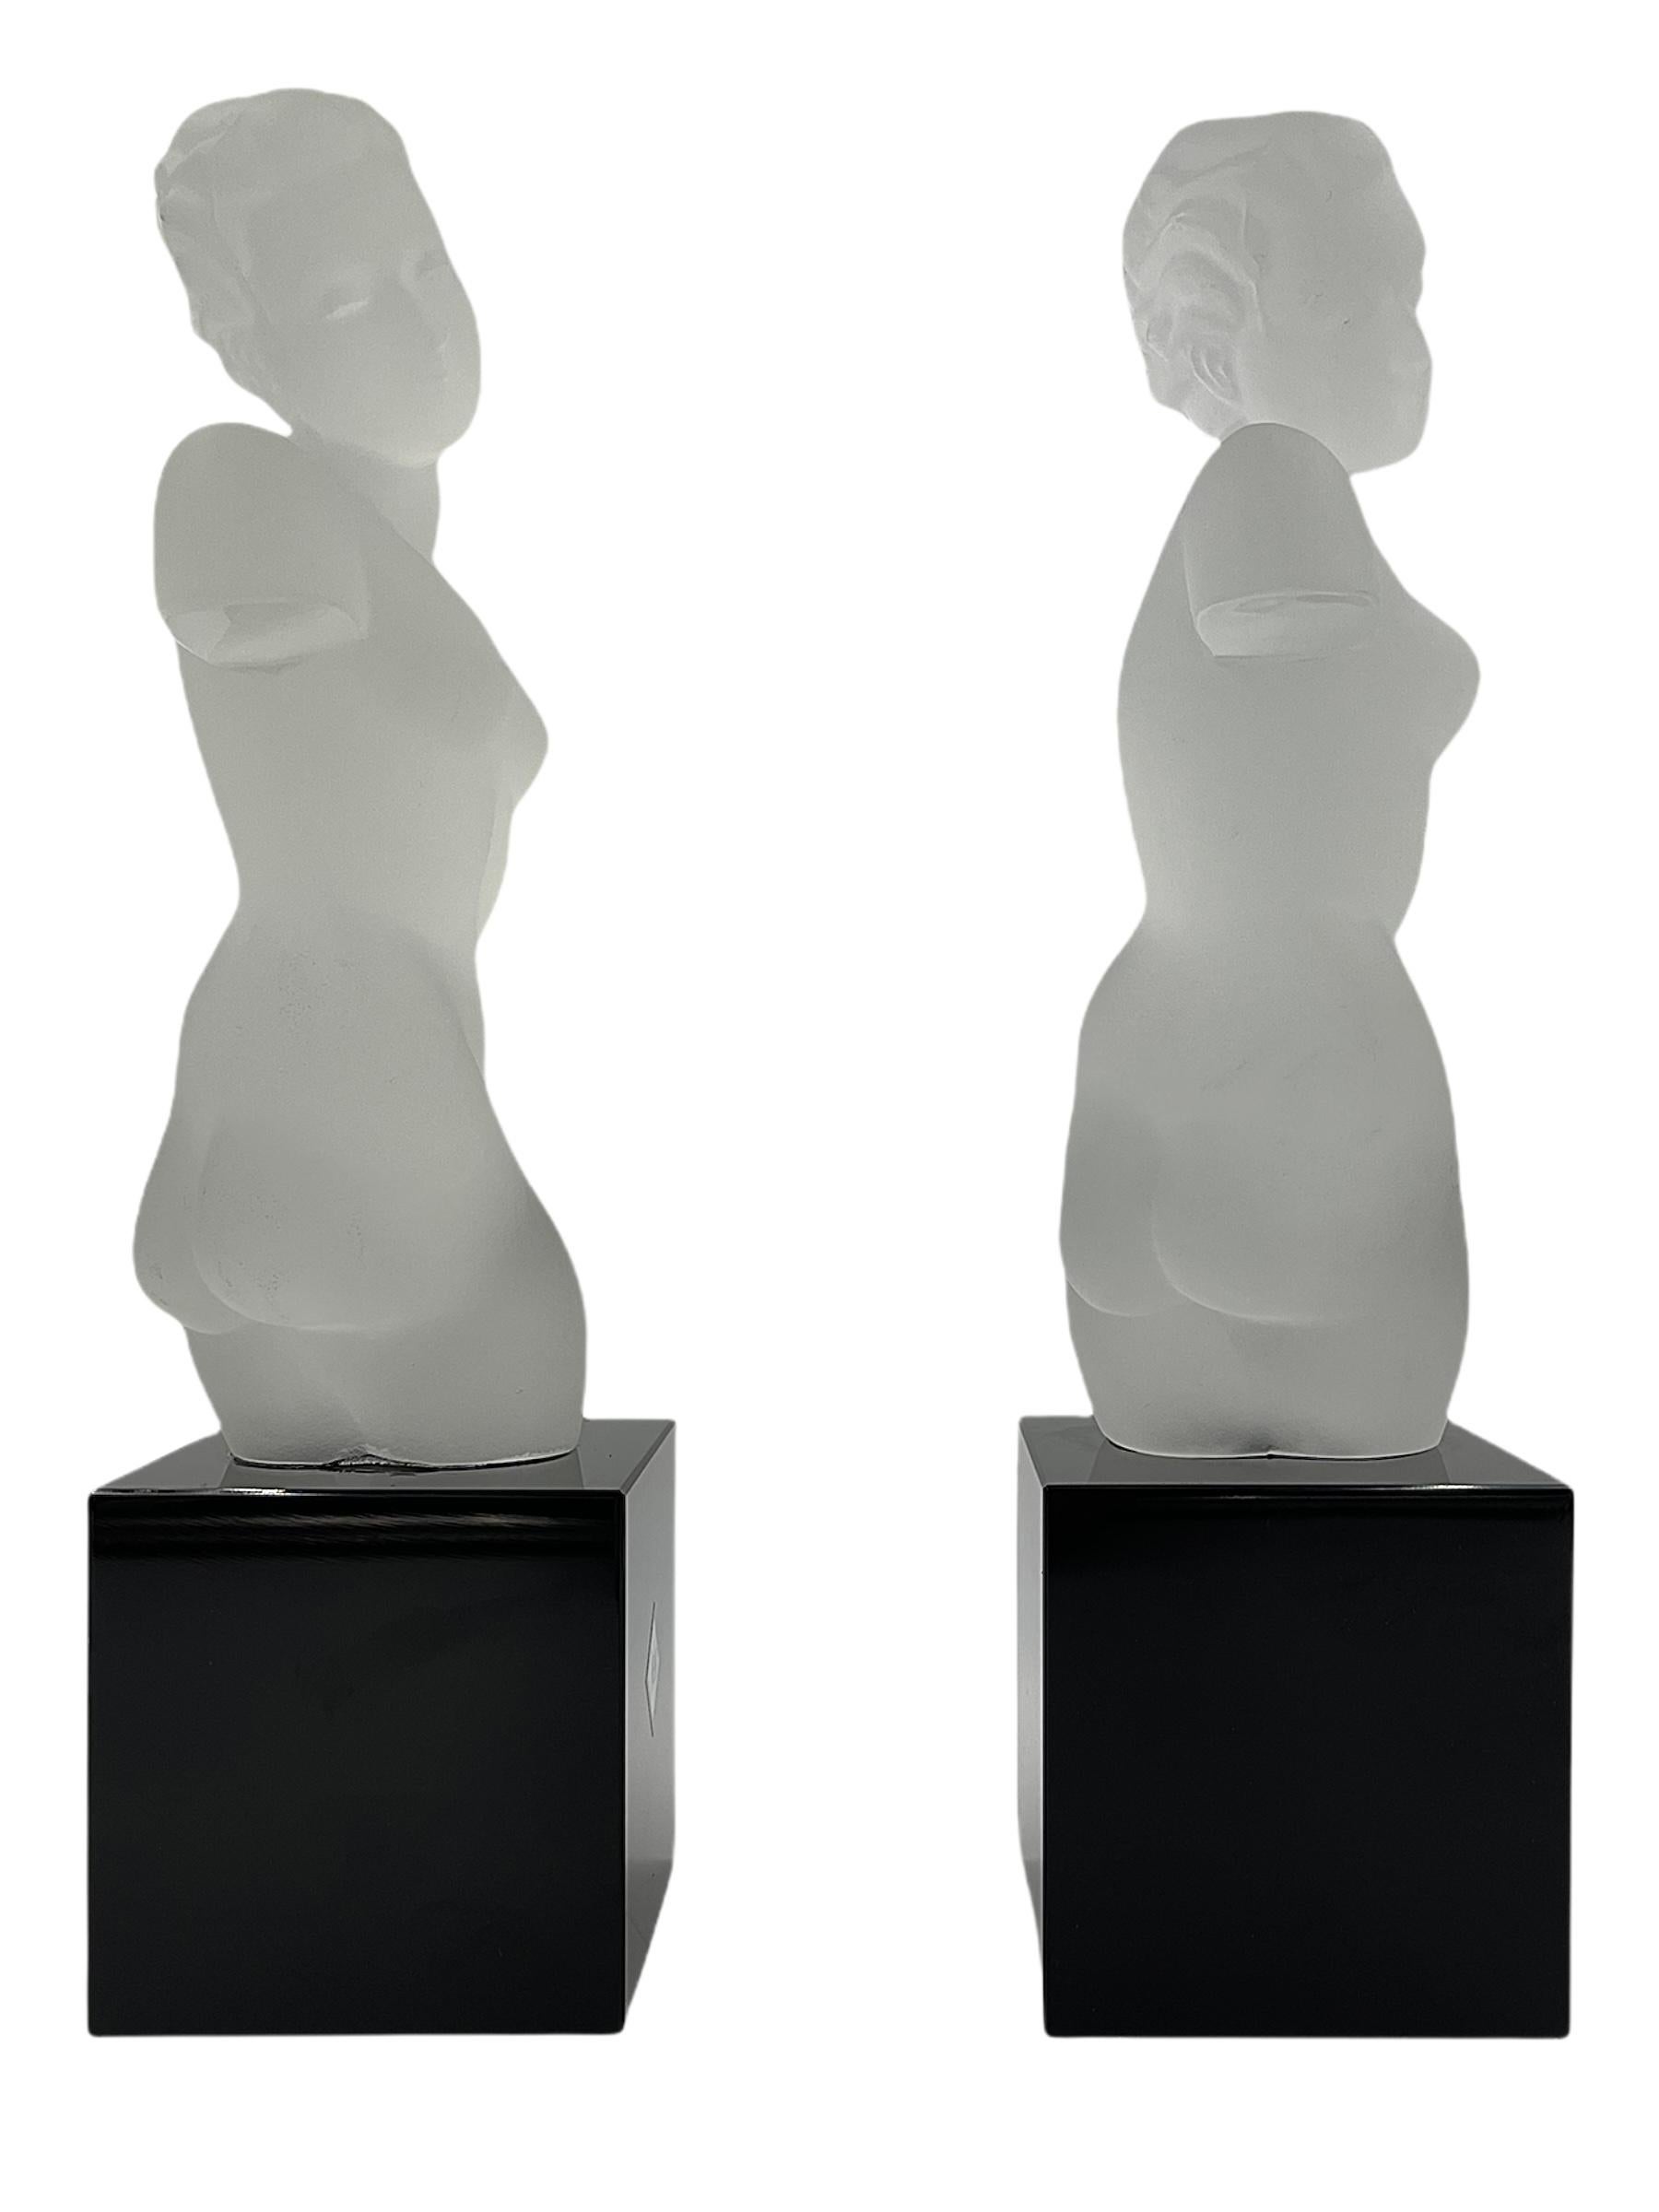 Spectacular and stunning female glass torsos with a clear frosted finish. in full relief and mounted on a cut and polished square black amethyst glass base. Designed by Eleon von Rommel / Berlin in 1935 for the 